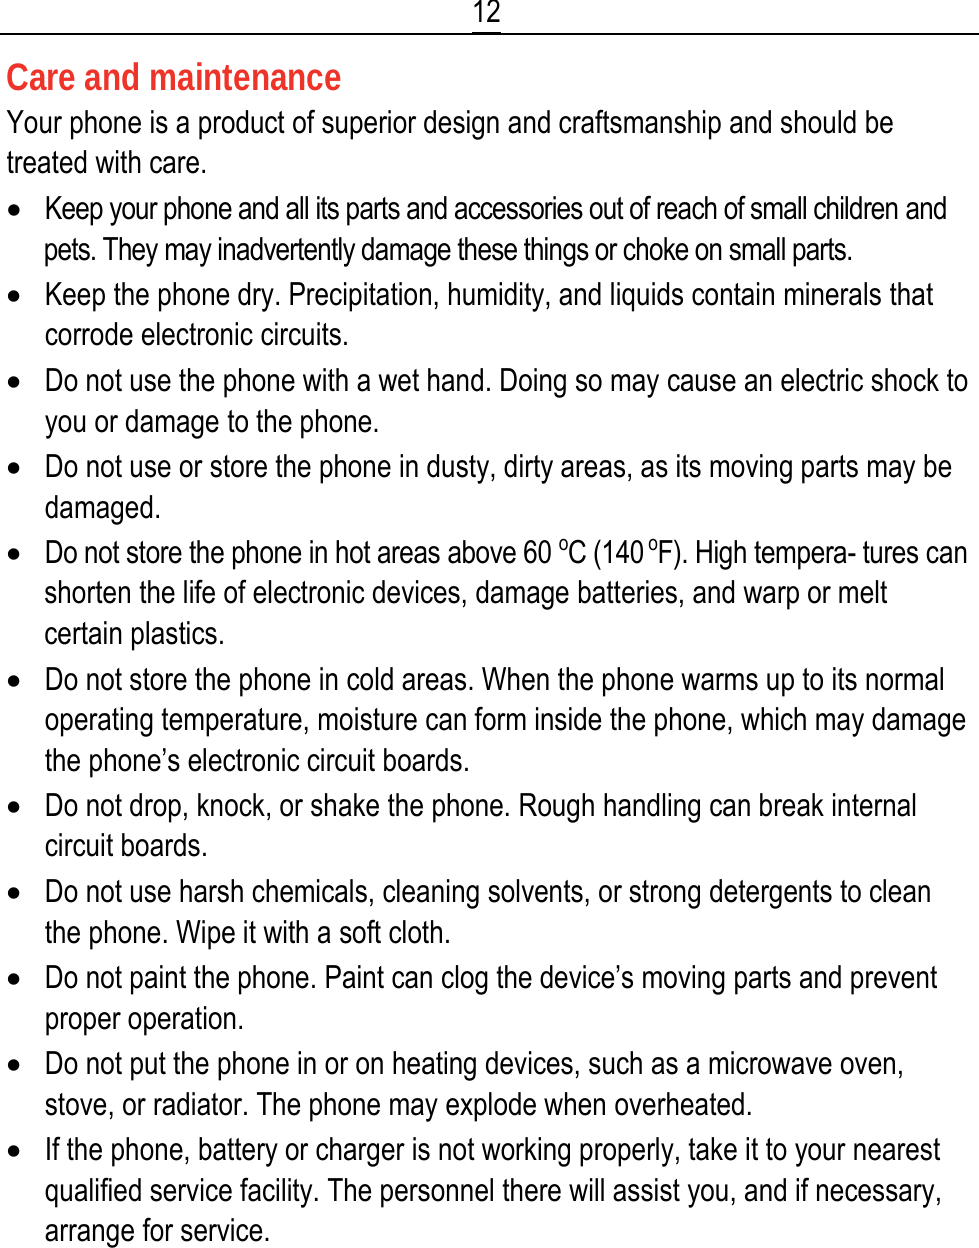  12 Care and maintenance Your phone is a product of superior design and craftsmanship and should be treated with care. • Keep your phone and all its parts and accessories out of reach of small children and pets. They may inadvertently damage these things or choke on small parts. • Keep the phone dry. Precipitation, humidity, and liquids contain minerals that corrode electronic circuits. • Do not use the phone with a wet hand. Doing so may cause an electric shock to you or damage to the phone. • Do not use or store the phone in dusty, dirty areas, as its moving parts may be damaged. • Do not store the phone in hot areas above 60 oC (140 oF). High tempera- tures can shorten the life of electronic devices, damage batteries, and warp or melt certain plastics. • Do not store the phone in cold areas. When the phone warms up to its normal operating temperature, moisture can form inside the phone, which may damage the phone’s electronic circuit boards. • Do not drop, knock, or shake the phone. Rough handling can break internal circuit boards. • Do not use harsh chemicals, cleaning solvents, or strong detergents to clean the phone. Wipe it with a soft cloth. • Do not paint the phone. Paint can clog the device’s moving parts and prevent proper operation. • Do not put the phone in or on heating devices, such as a microwave oven, stove, or radiator. The phone may explode when overheated. • If the phone, battery or charger is not working properly, take it to your nearest qualified service facility. The personnel there will assist you, and if necessary, arrange for service. 